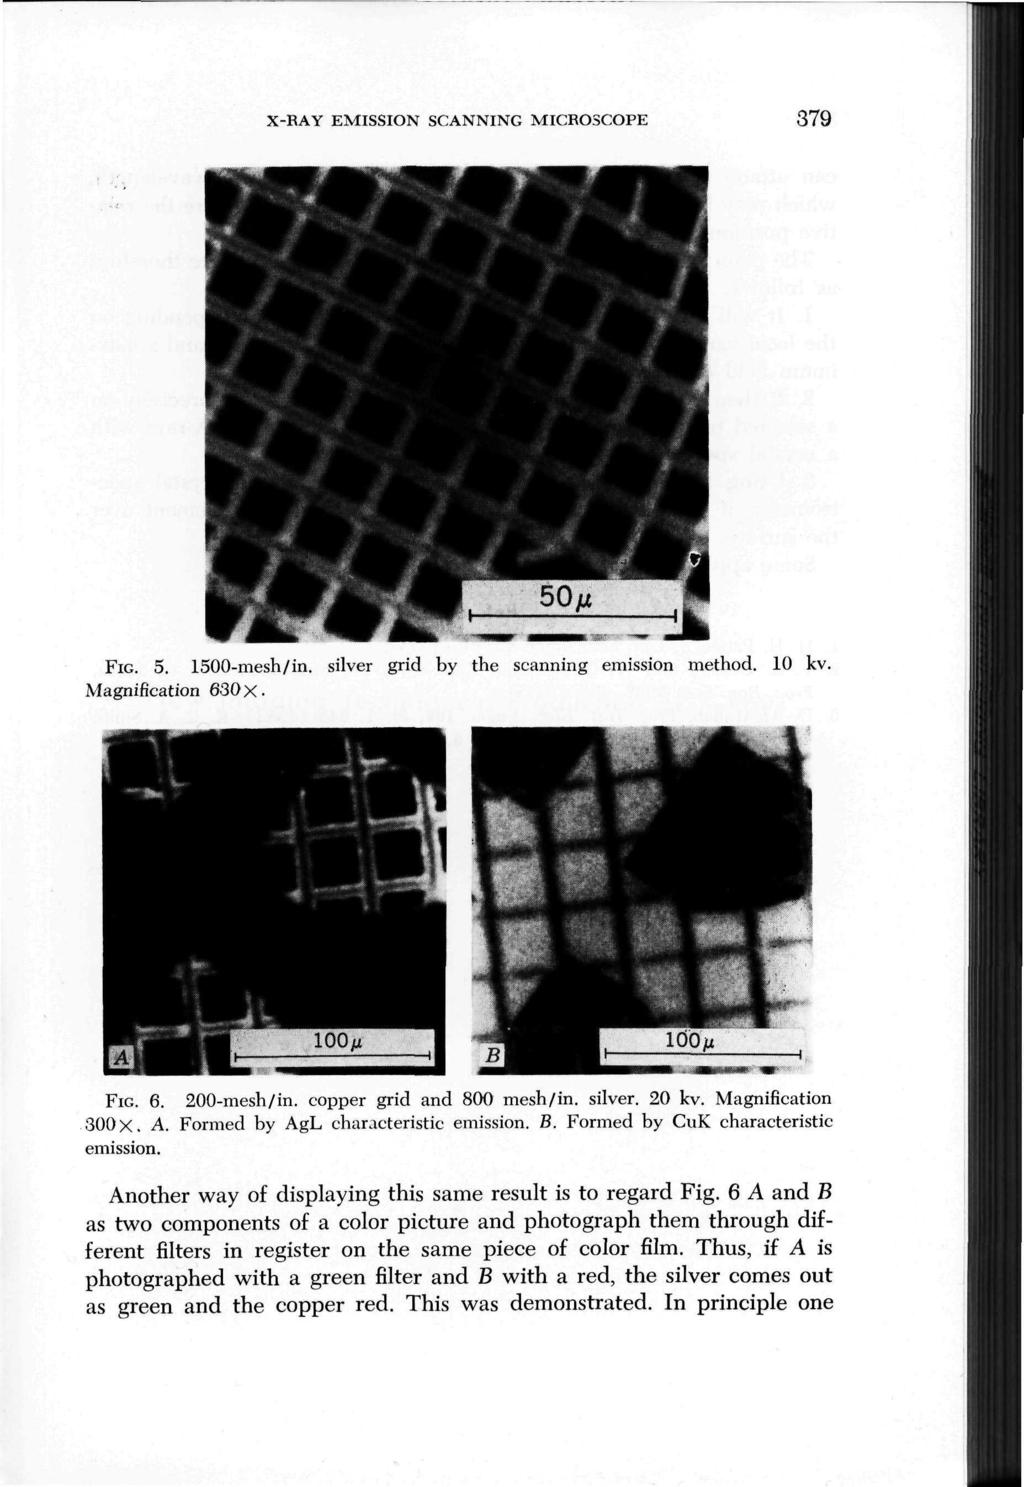 X-RAY EMISSION SCANNING MICROSCOPE 379 FIG. 5. 1500-mesh/in. silver grid by the scanning emission method. 10 kv. Magnification 630 X. FIG. 6. 200-mesh/in. copper grid and 800 mesh/in. silver. 20 kv.